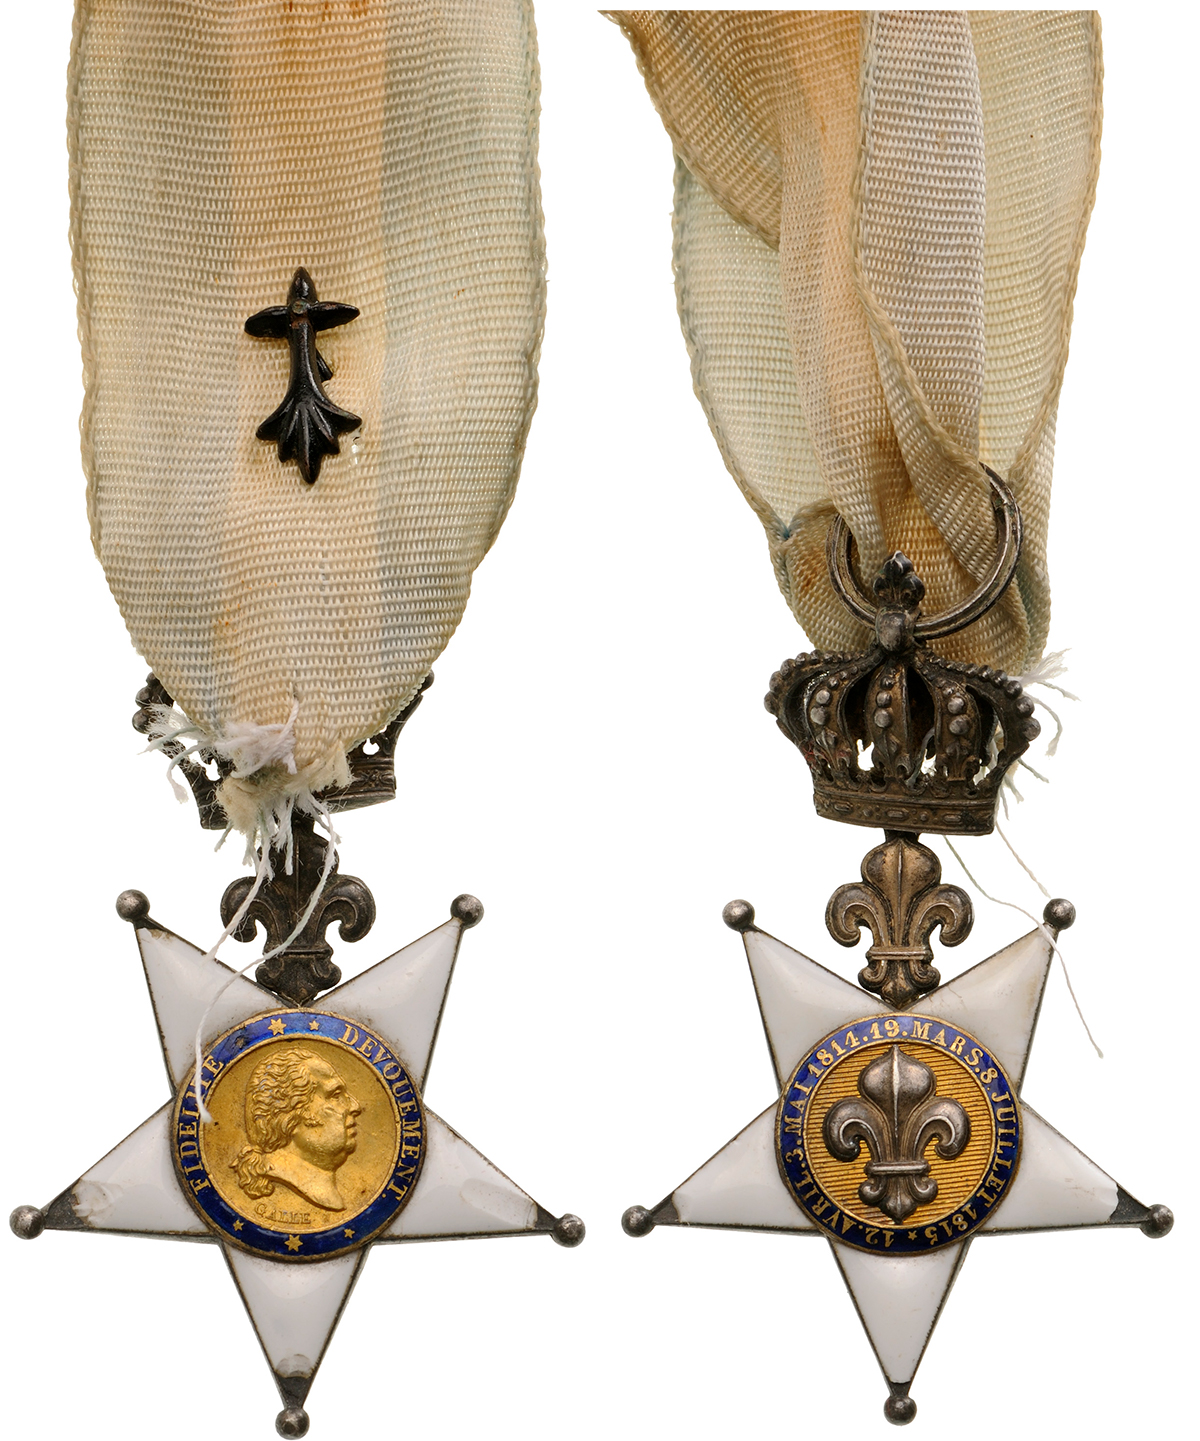 DECORATION OF THE LILY FOR THE NATIONAL GUARD OF PARIS, instituted in 1814